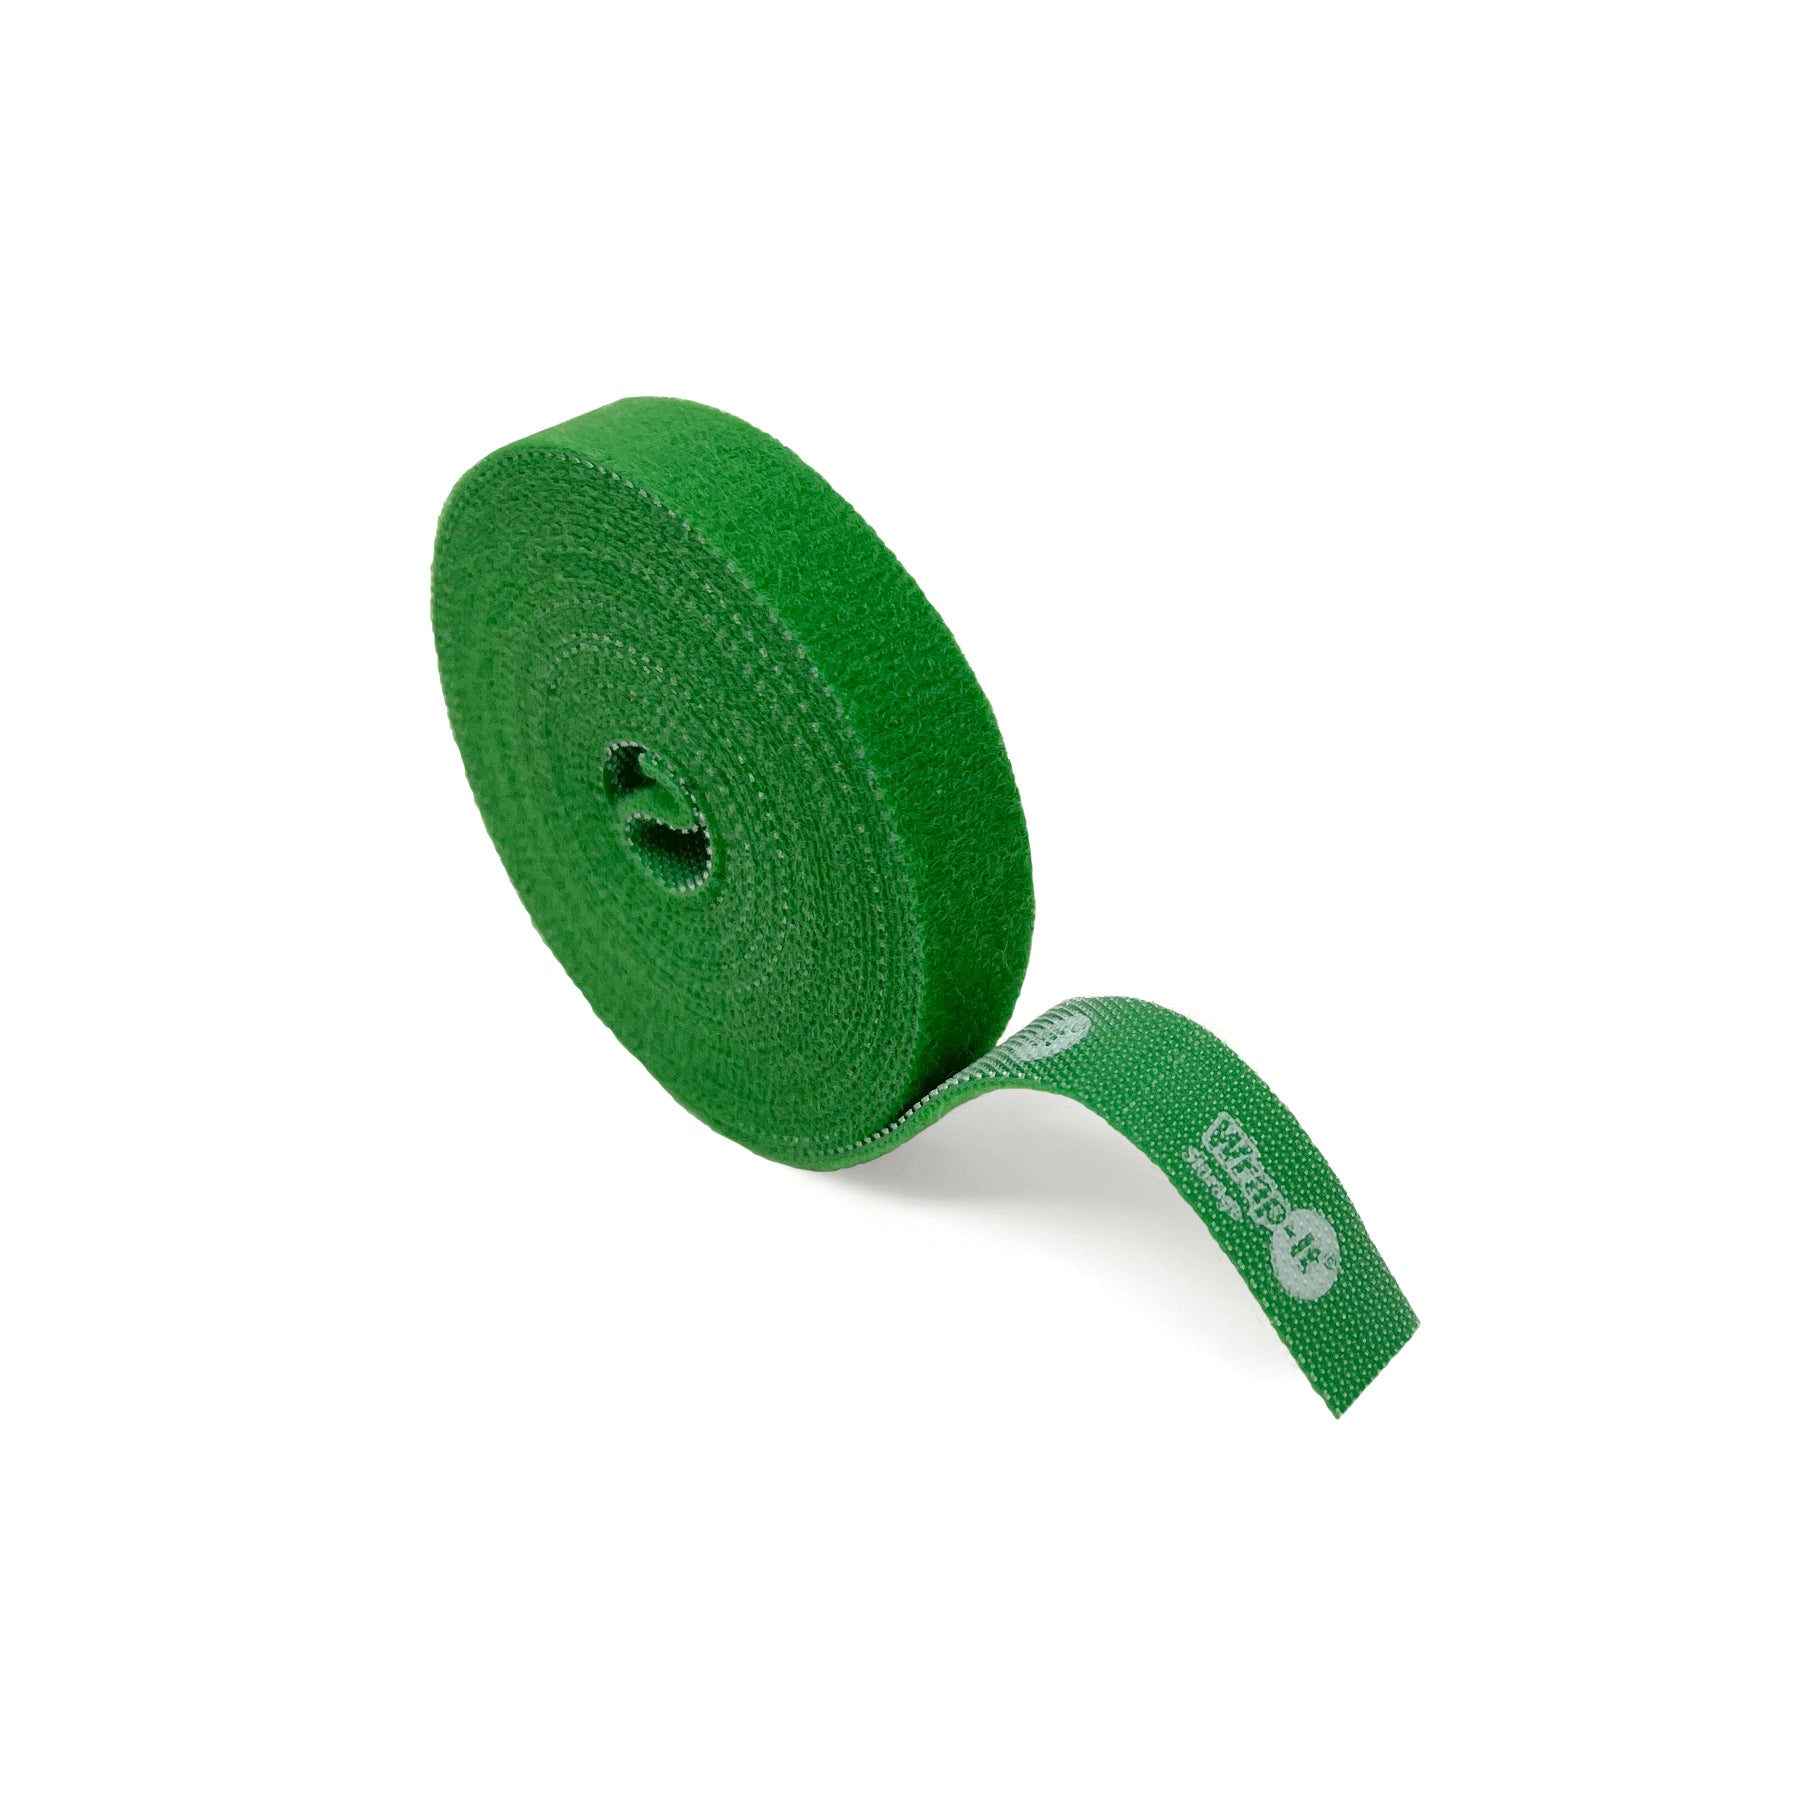 Self-Gripping Perforated Roll 12' x .50" Green - Wrap-It Storage